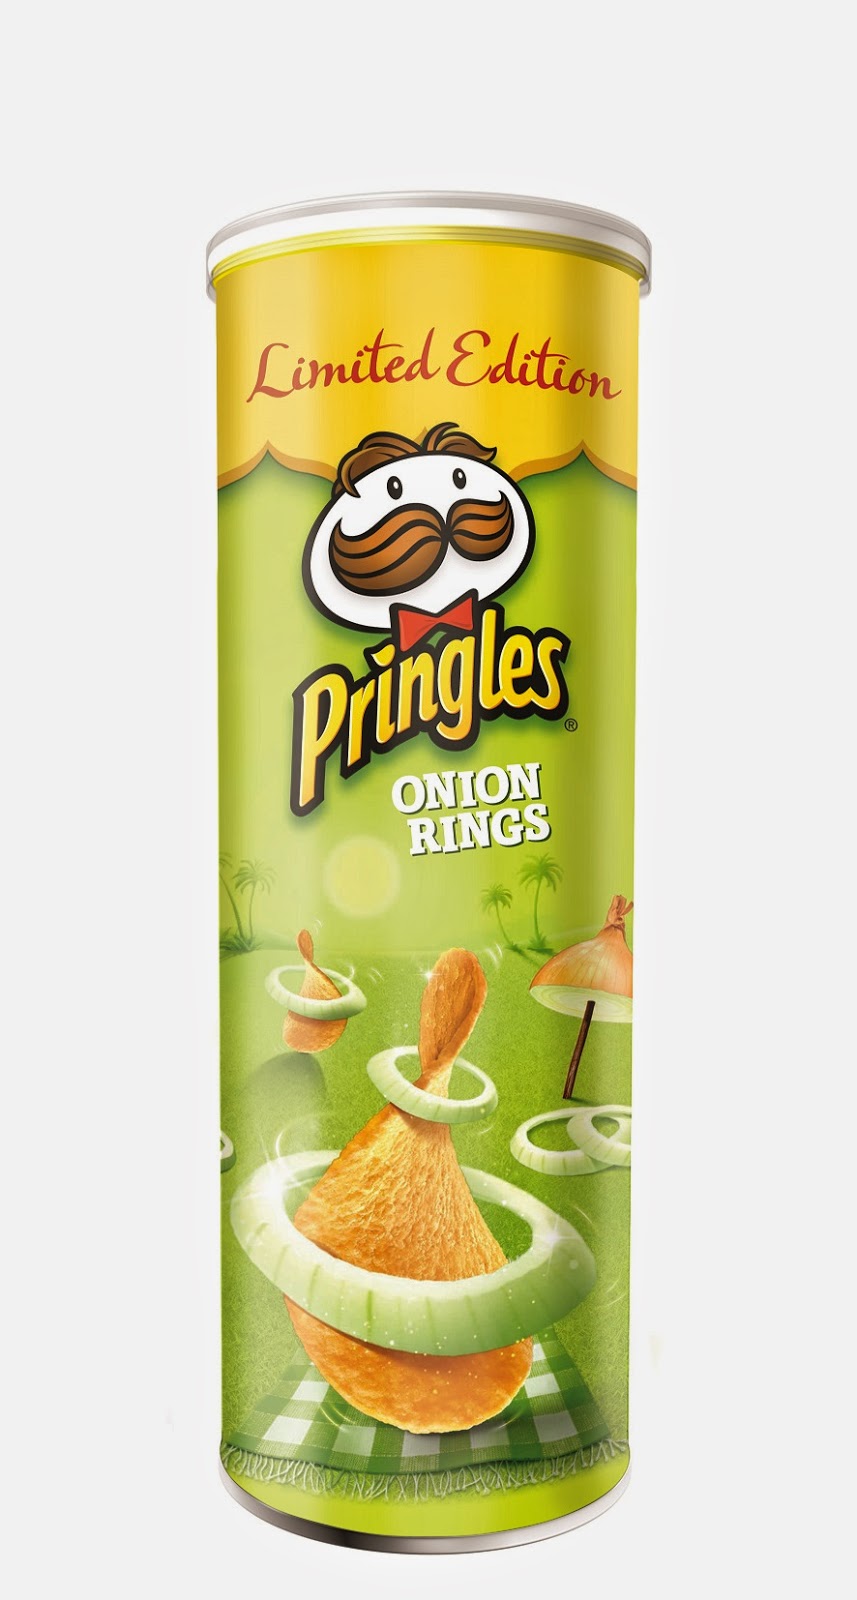 Food Review - Who doesn't love Pringles!